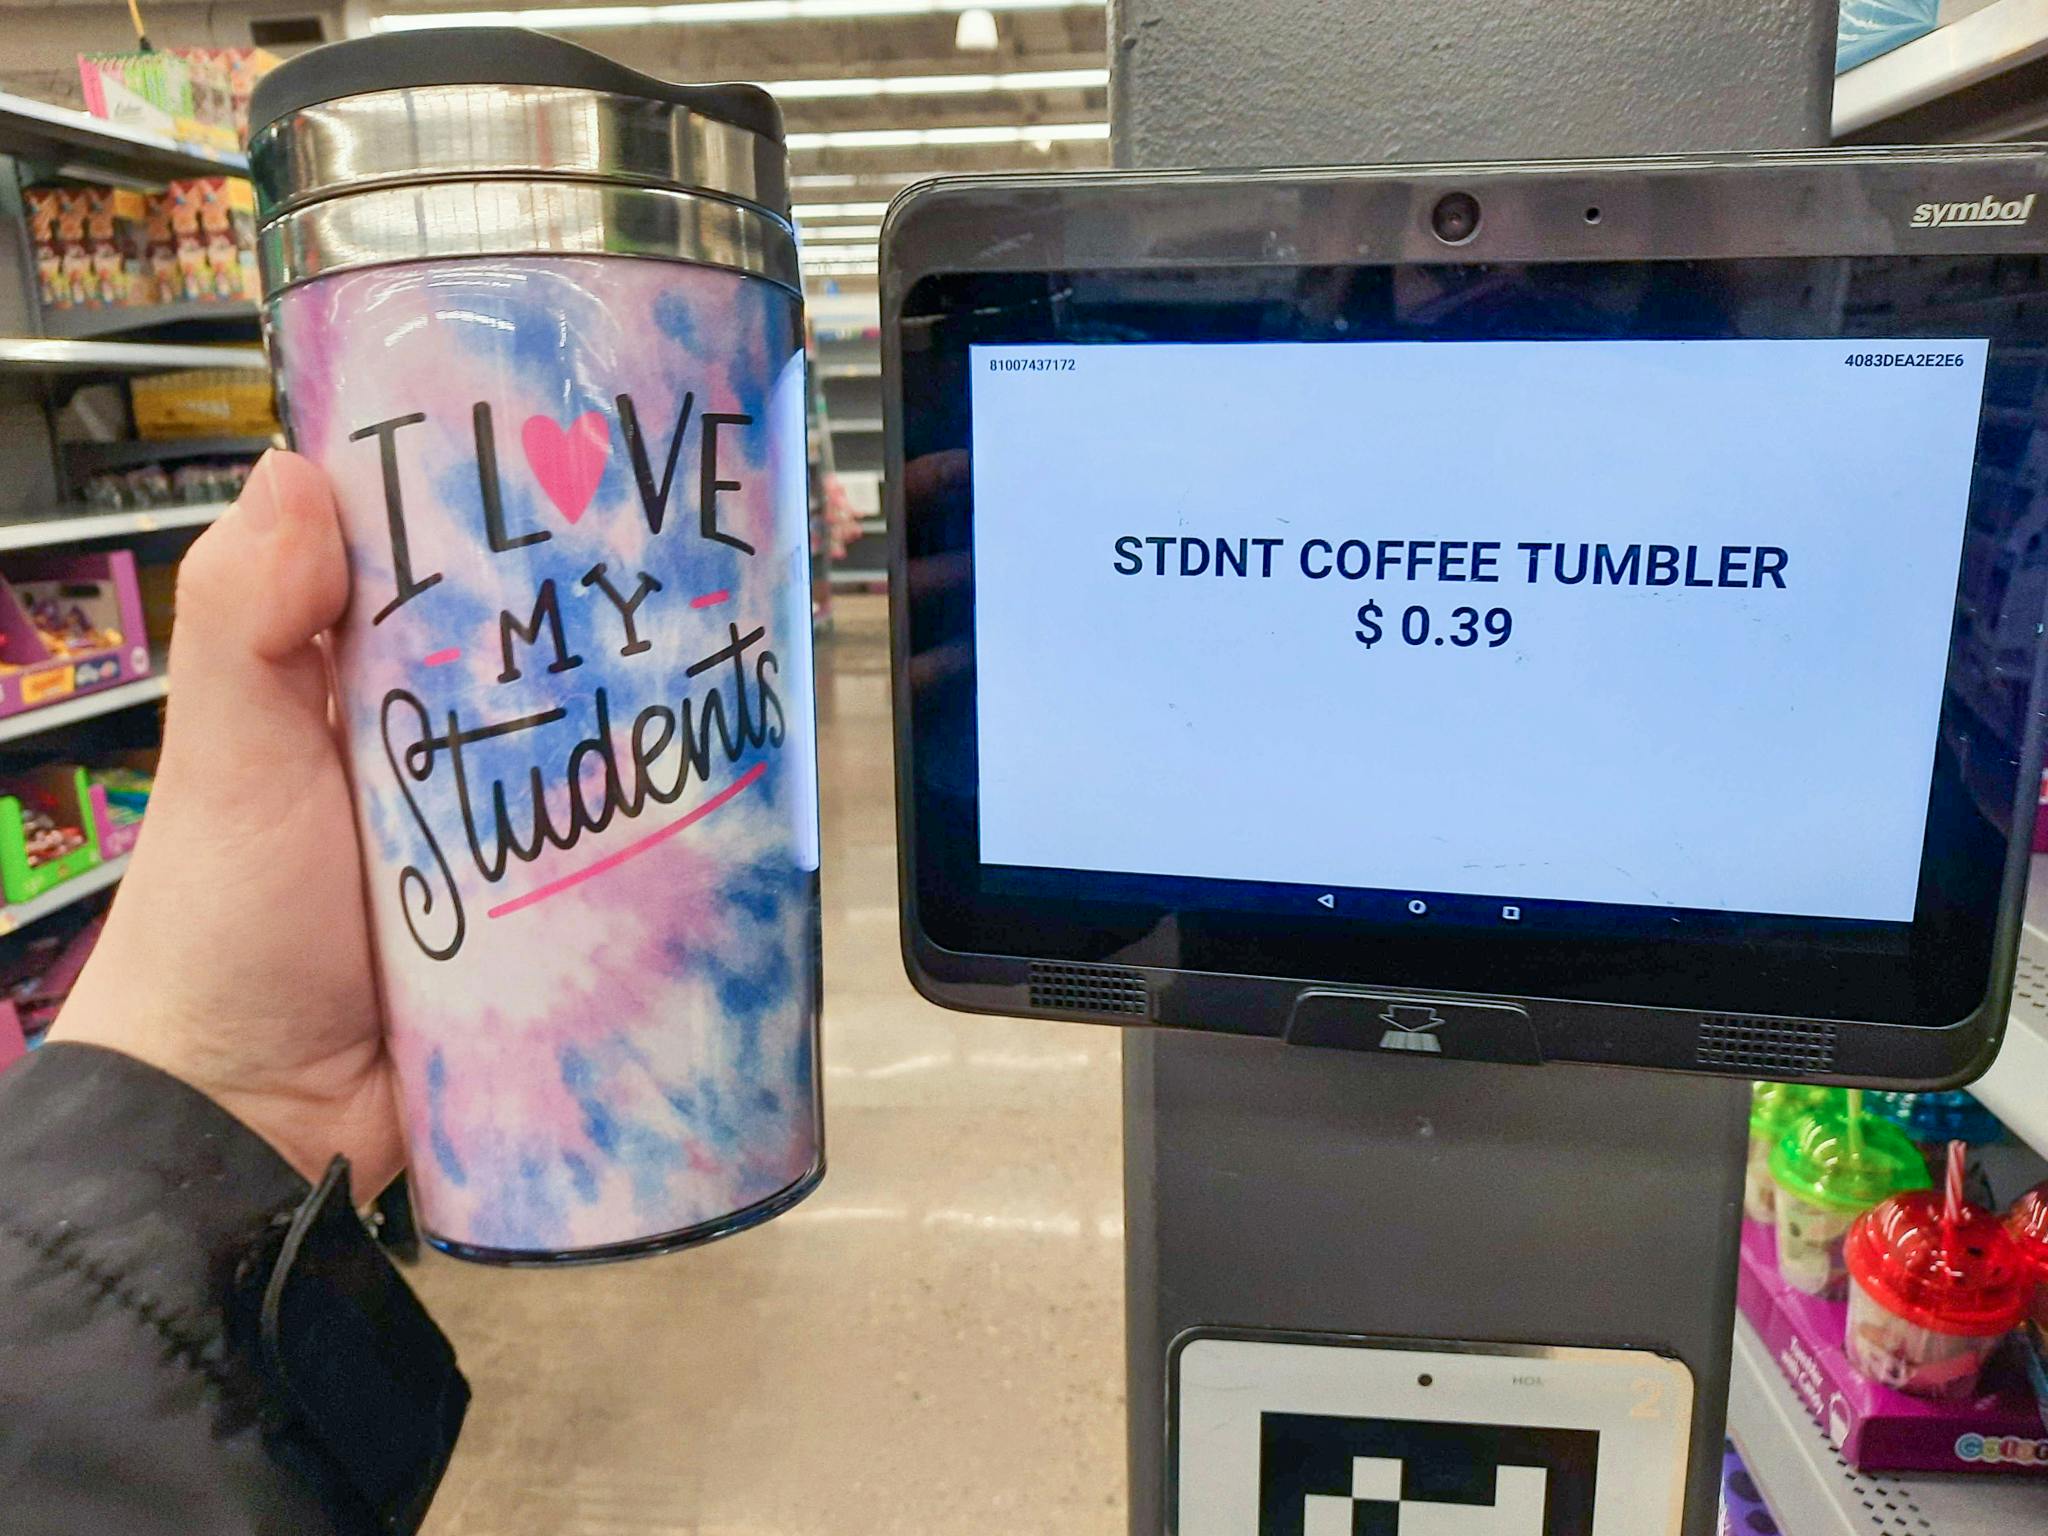 A person's hand holding up a coffee tumbler next to a price scanner in Walmart which shows the price to be 39 cents.